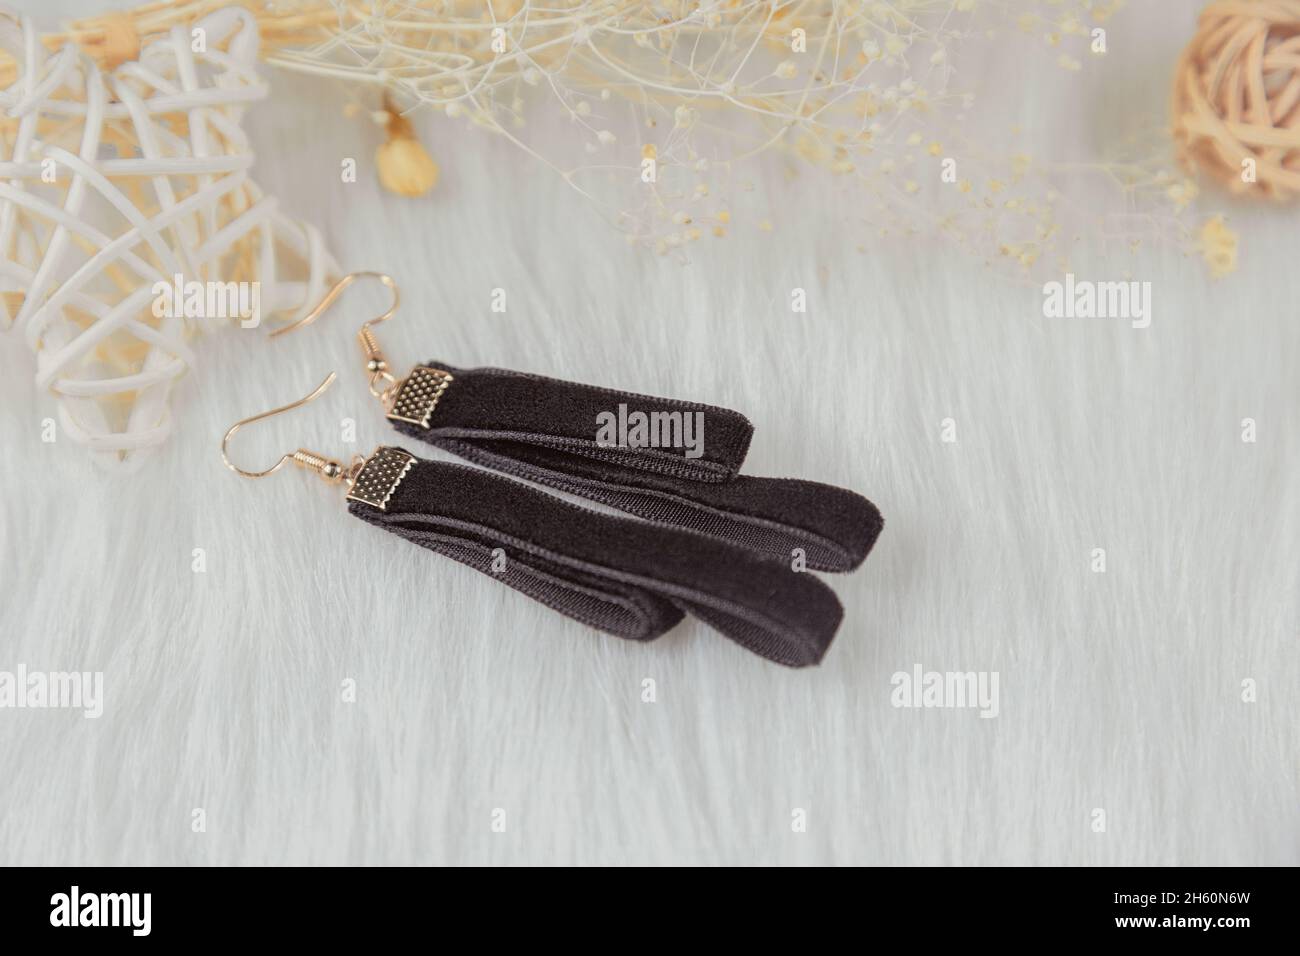 Black streamer earrings. Beside the earrings are rattan products, withered yellow bouquet specimens and other decorative objects. Stock Photo